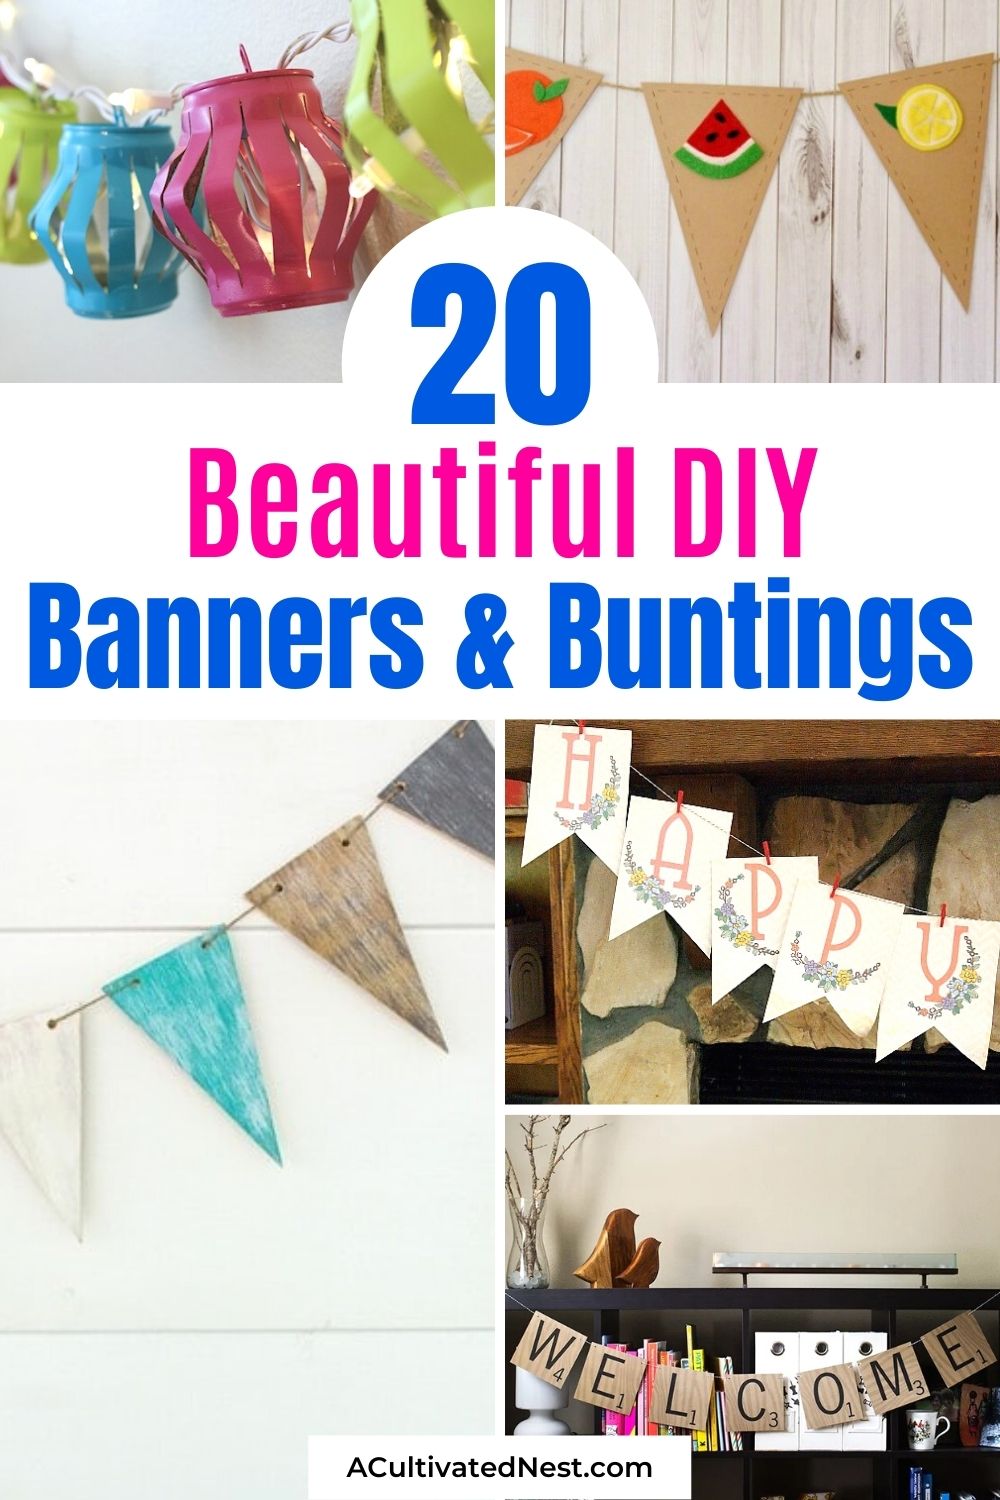 20 Beautiful DIY Banners and Buntings- For a budget-friendly way to spruce up your home for different seasons, holidays, and parties, check out these beautiful DIY banners and buntings! | homemade banner craft, #diyProject #craftIdeas #diyBunting #diyBanner #ACultivatedNest